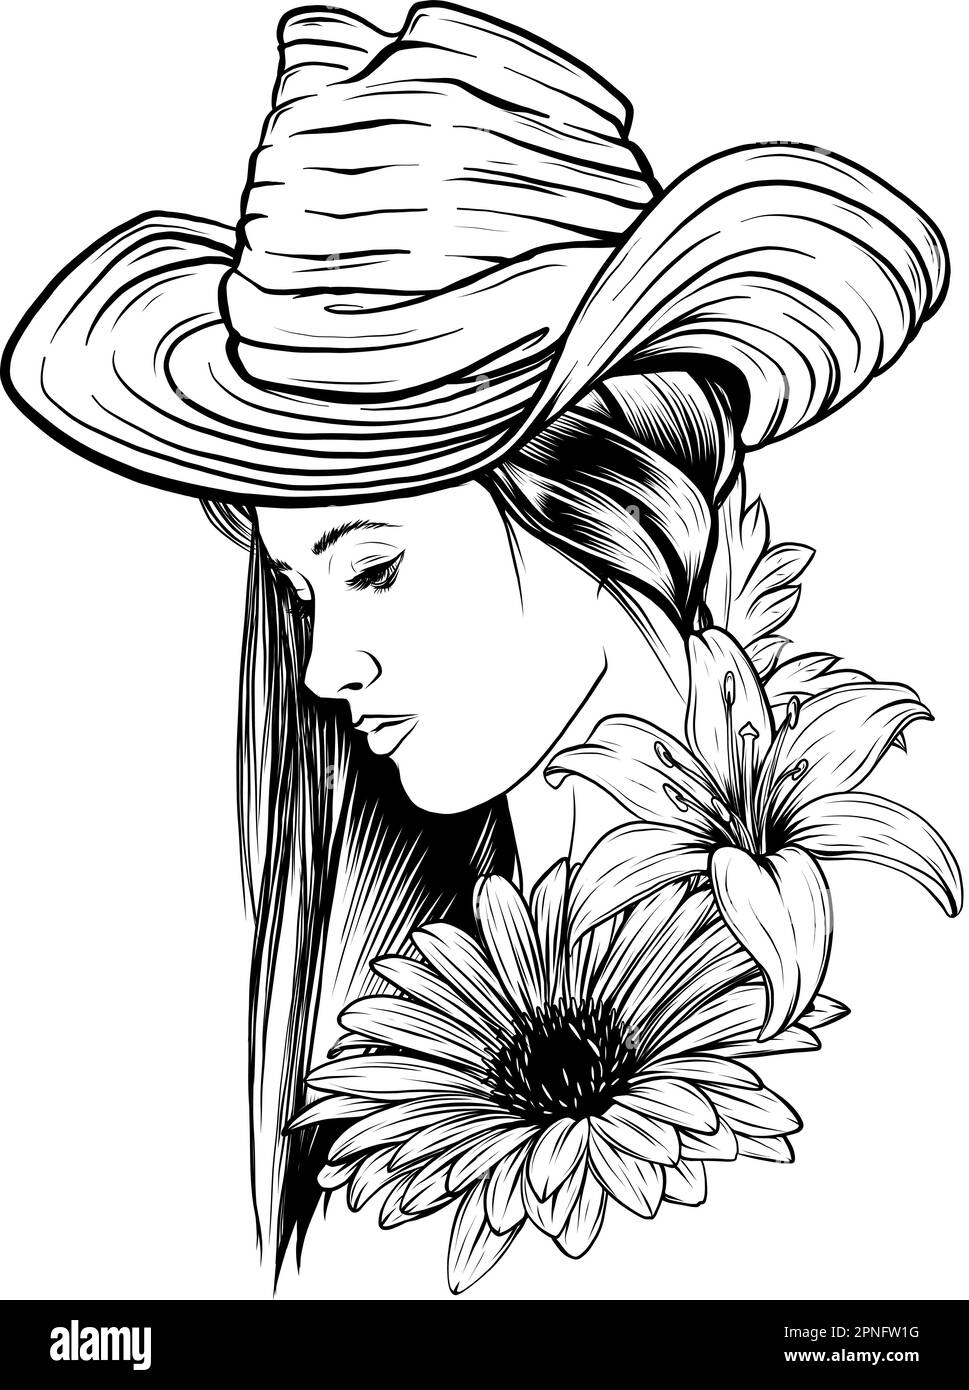 Young woman with a cowboy hat. Cowgirl Vintage engraved style hand drawn vector illustration isolated on white backgrounds. Stylized black and white Stock Vector